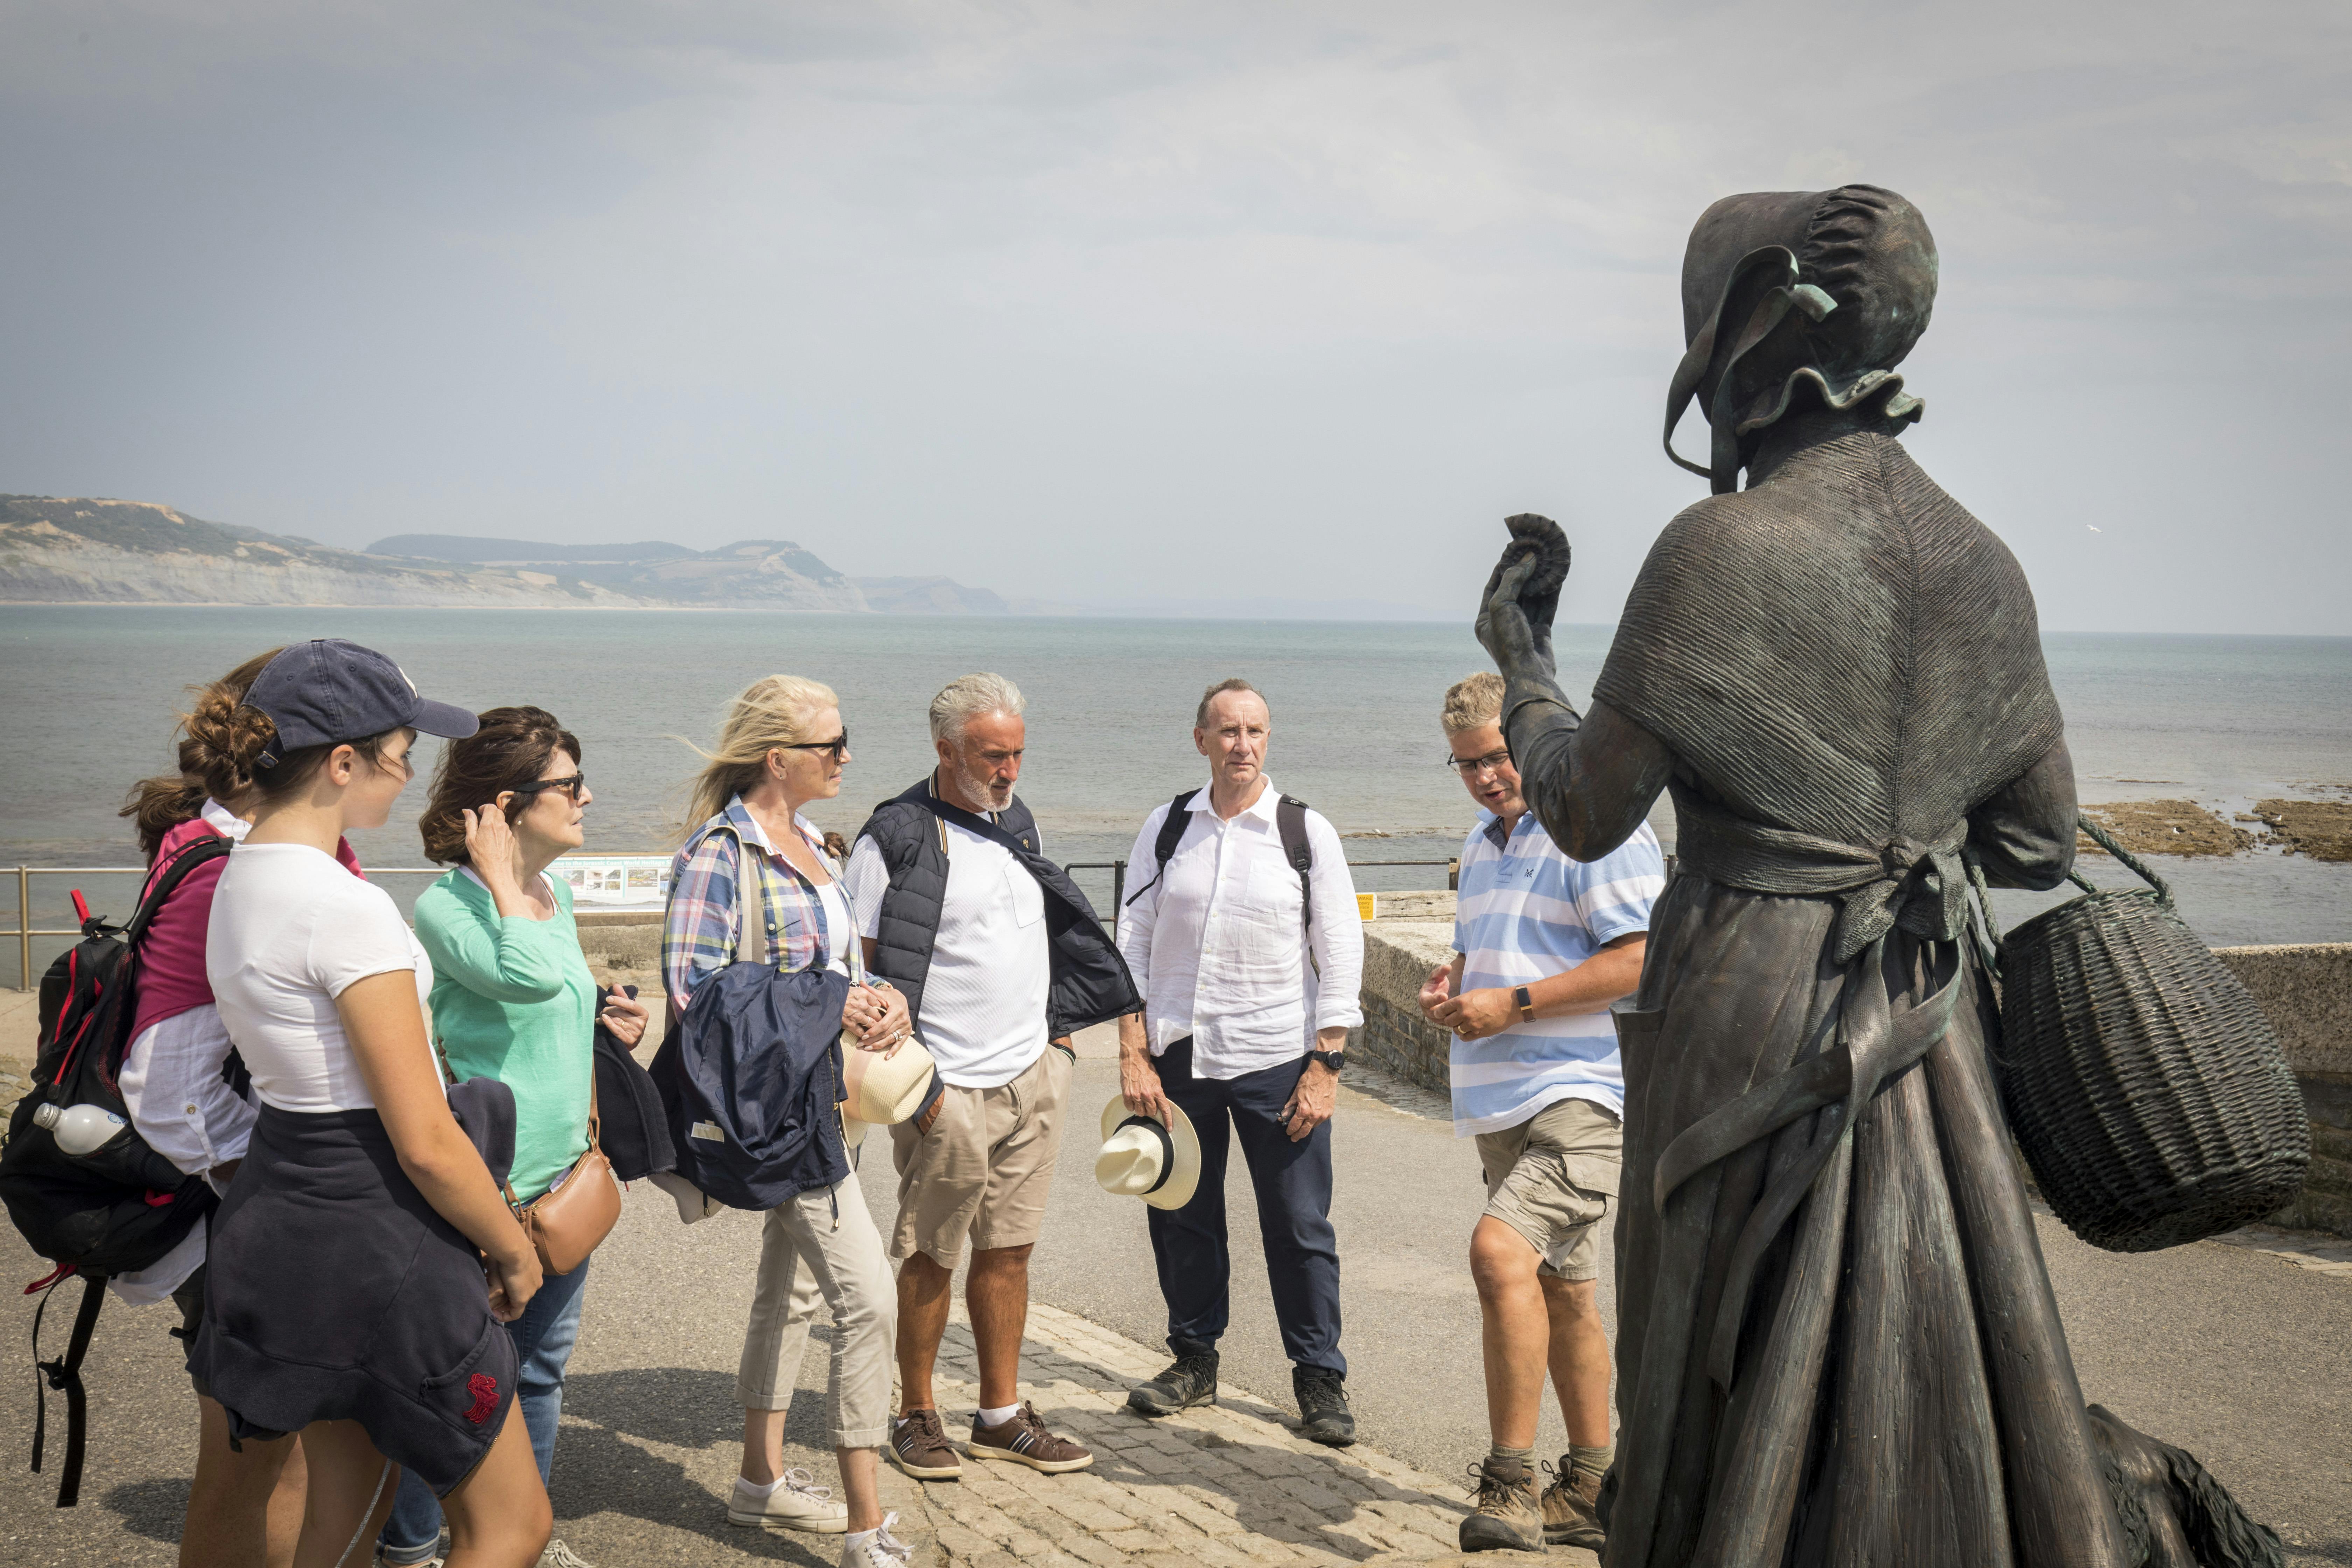 Mary Anning statue, Lyme Regis, Southern England